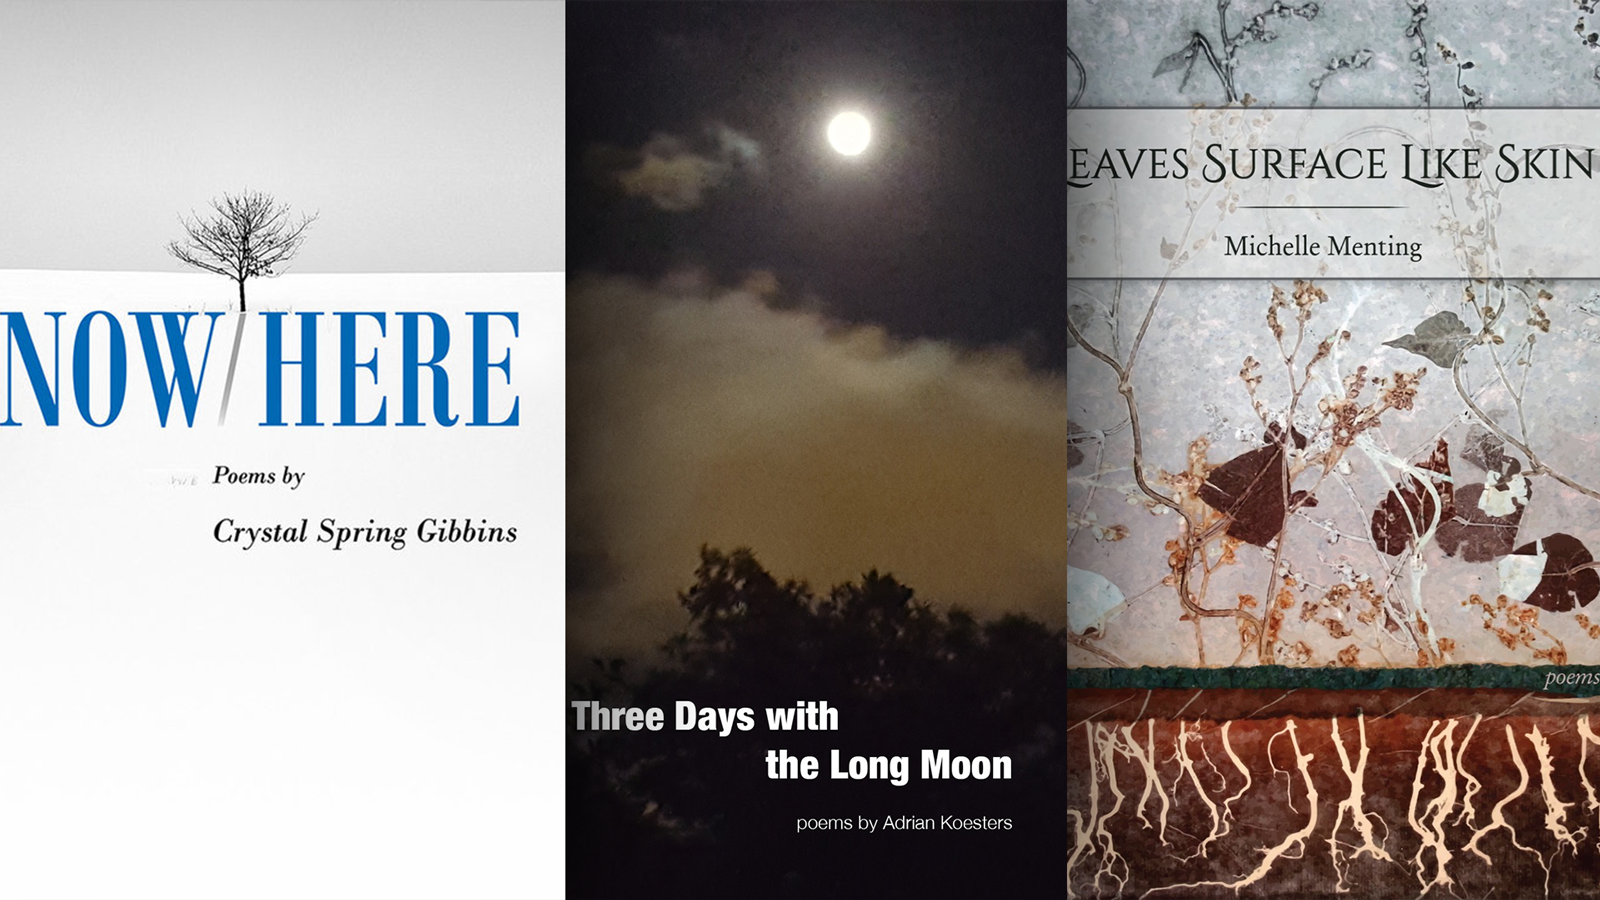 Covers of NowHere, Three Days with the Long Moon, and Leaves Surface Like Skin; links to news story